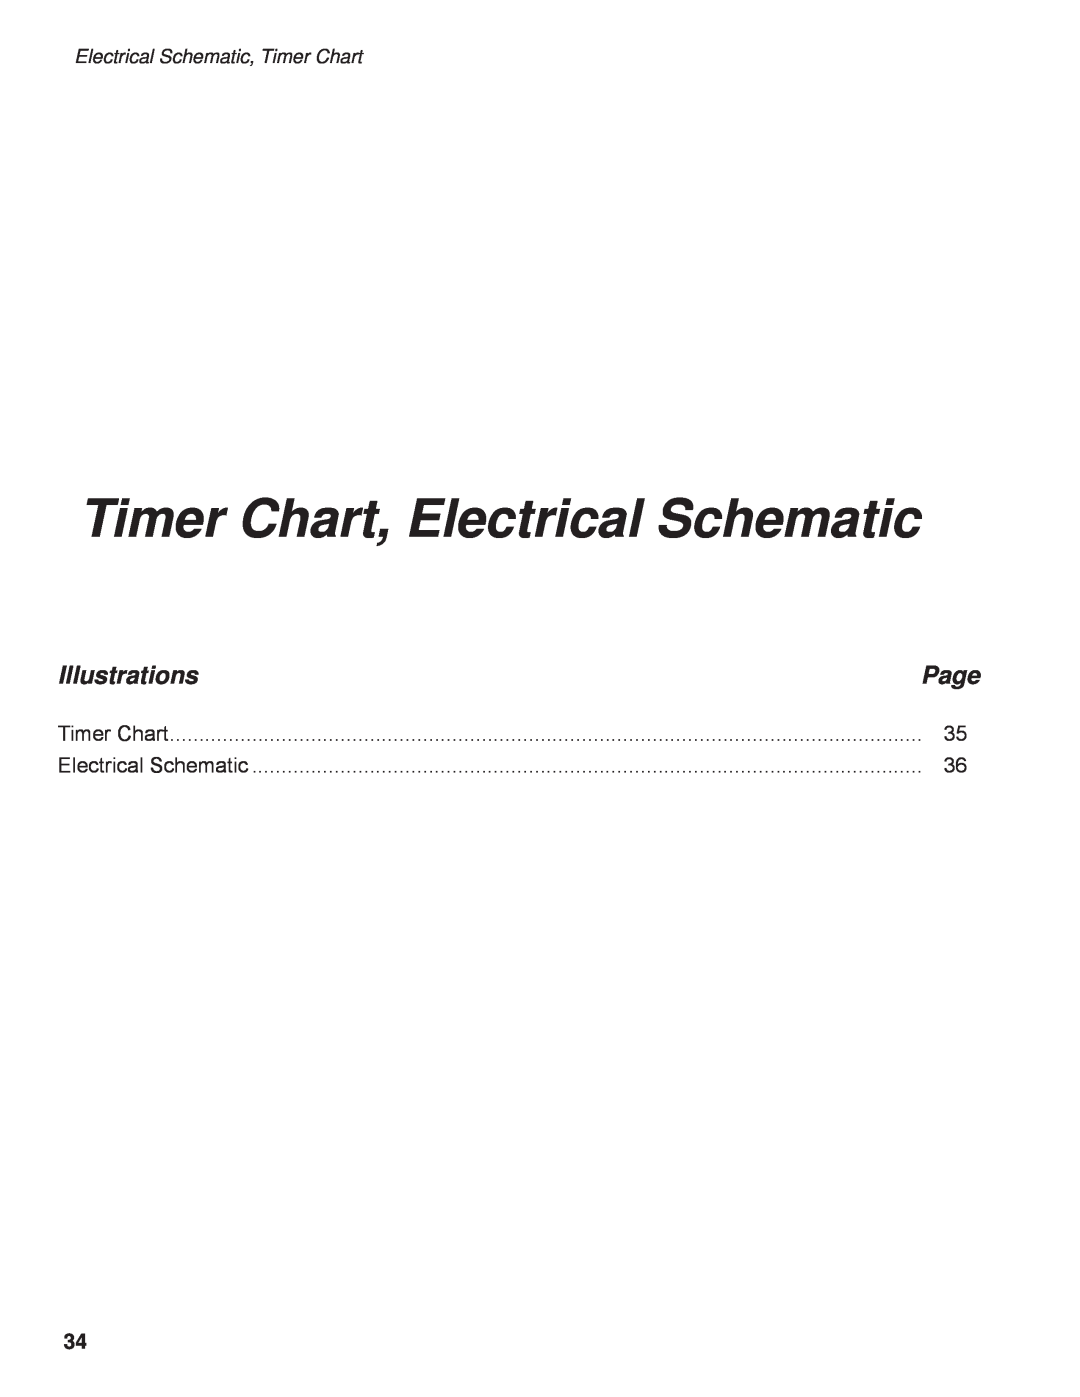 GE DH2000 operation manual Timer Chart, Electrical Schematic, Electrical Schematic, Timer Chart, Illustrations, Page 